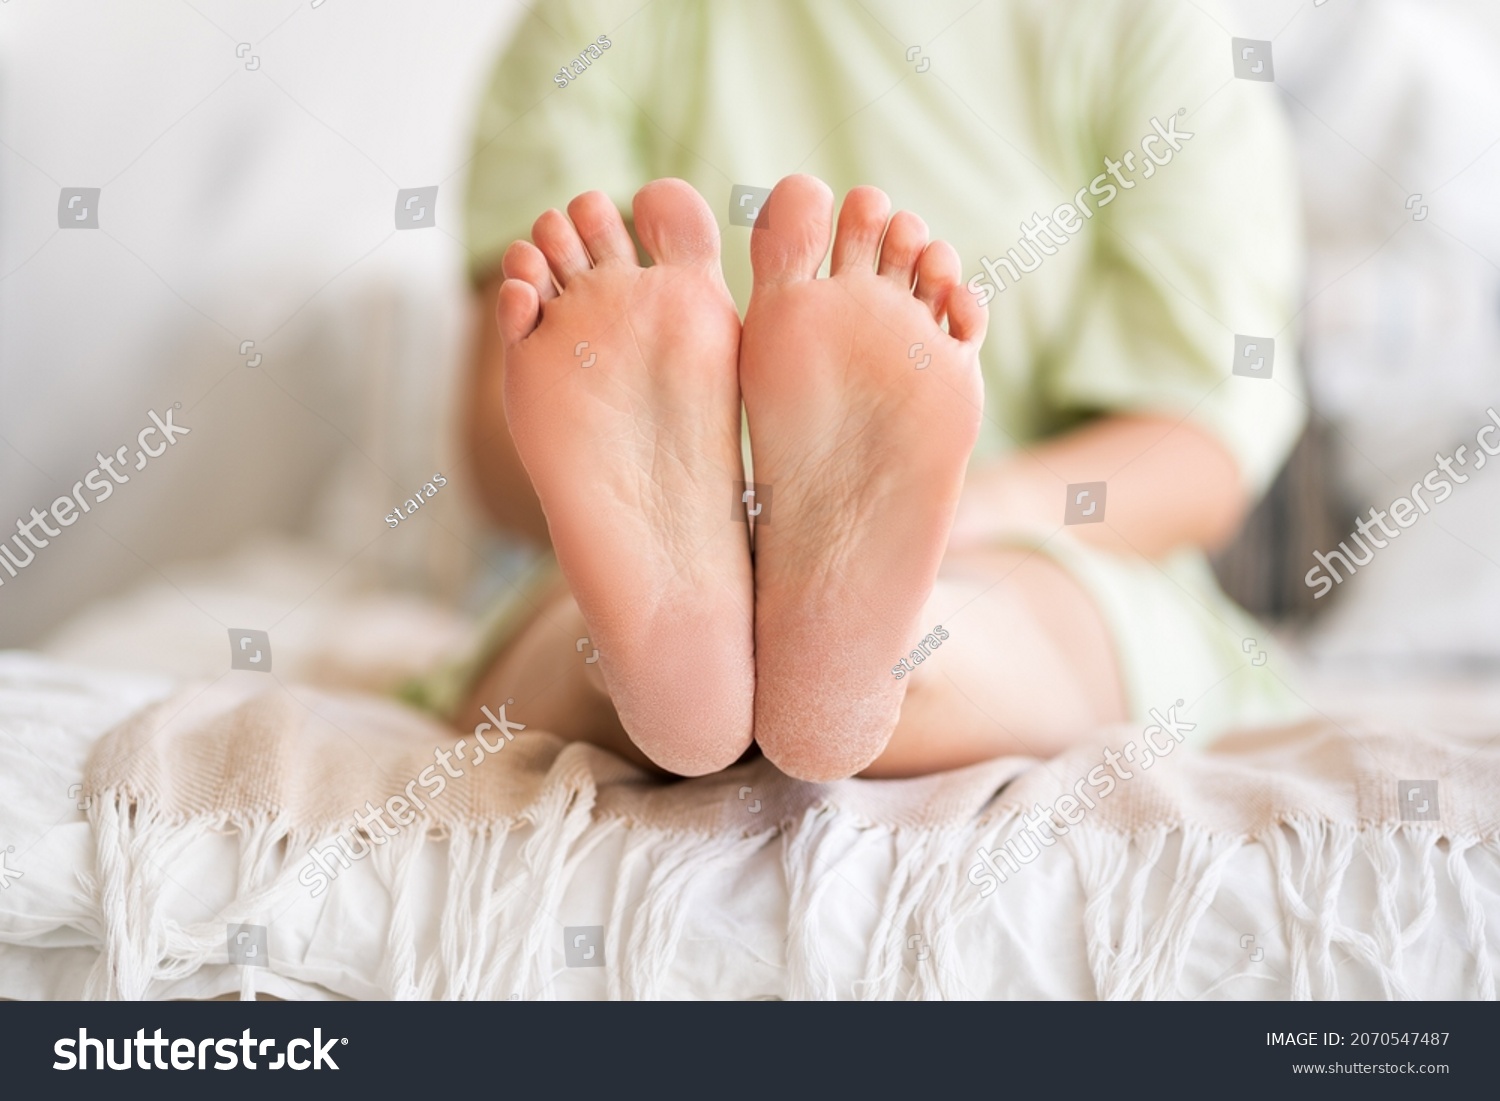 Woman relaxing in bedroom, female feet with dry cracked skin close-up, foot care concept, home interior #2070547487